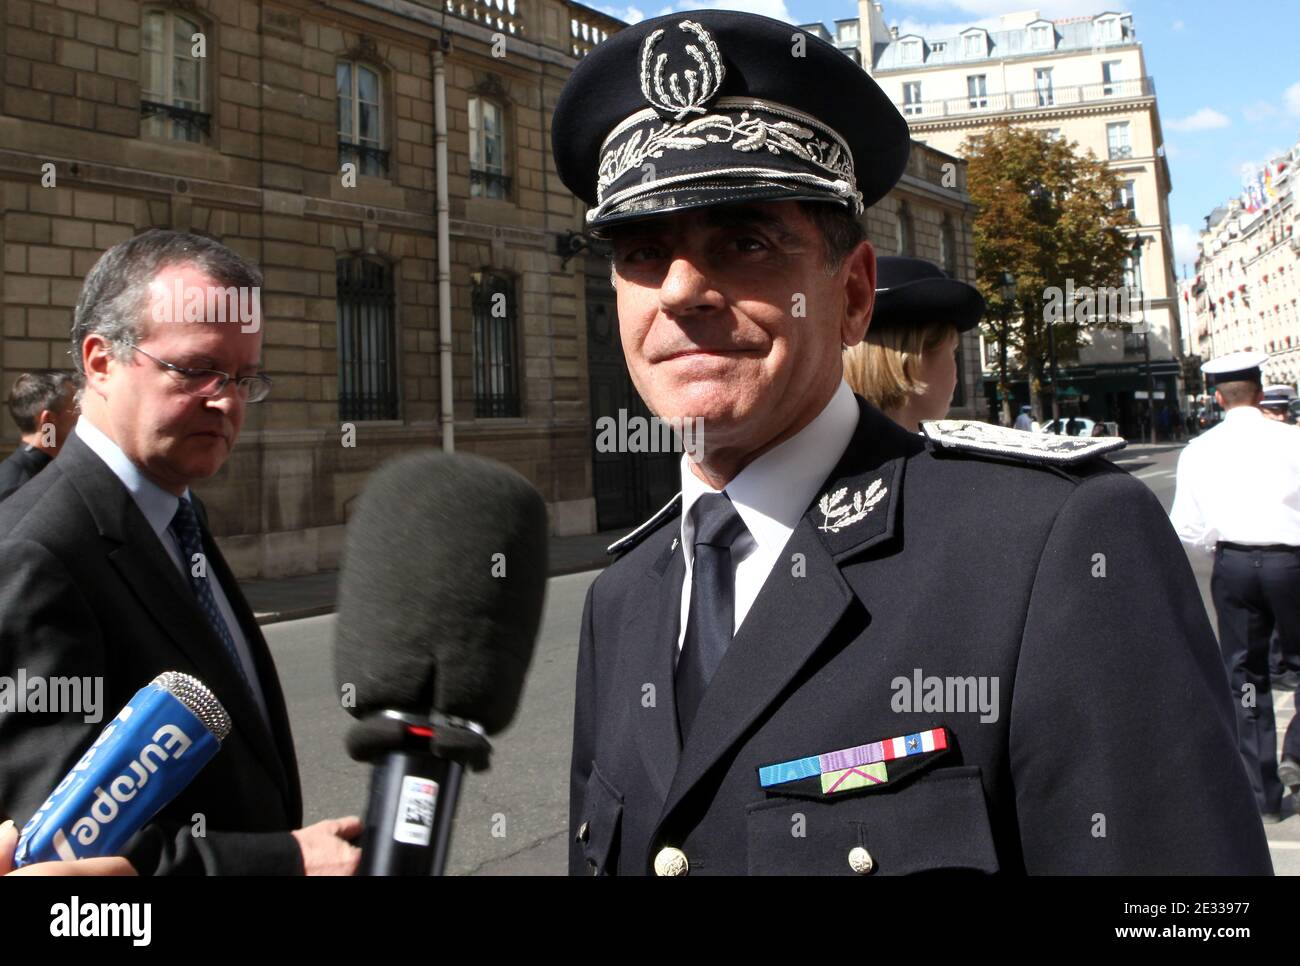 Departmental director of the law and order, Jean-Claude Borel-Garin (C) and  policemen assaulted in Tarterets, answers to journalists after a meeting  with french President, Nicolas Sarkozy at Elysee Palace in Paris, France